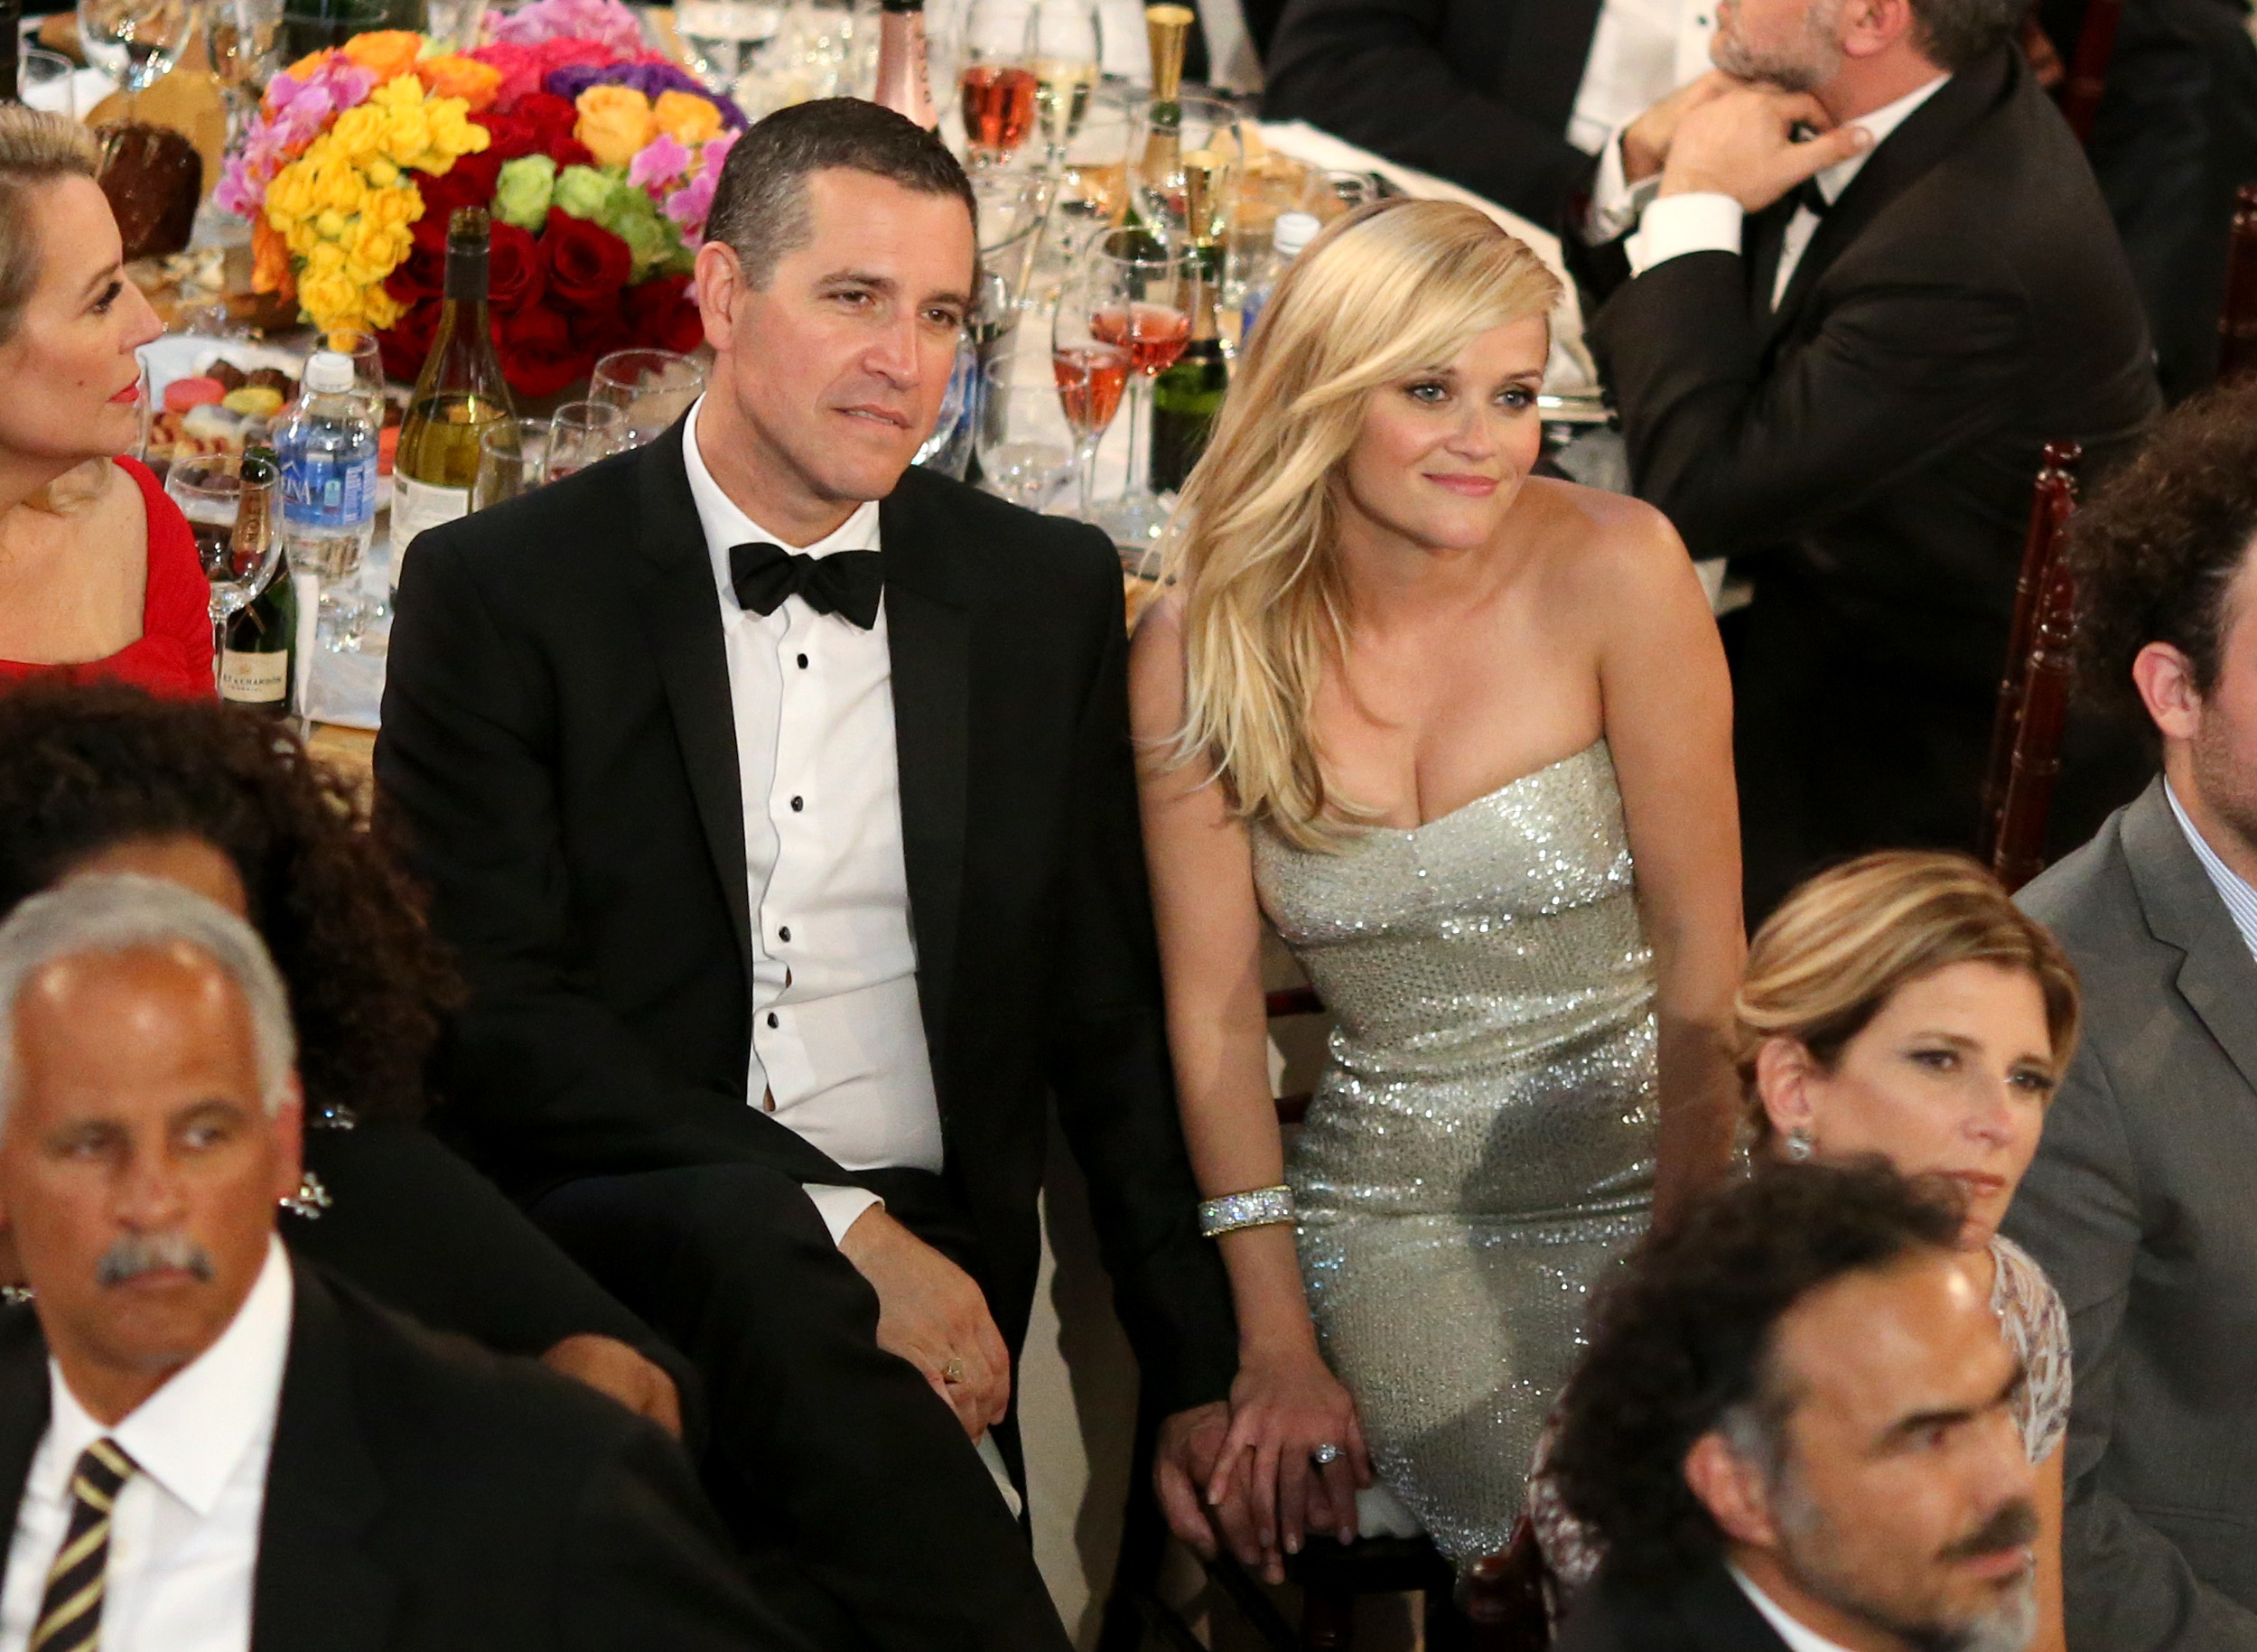 Close-up of Reese and Jim smiling at a table at a gala event